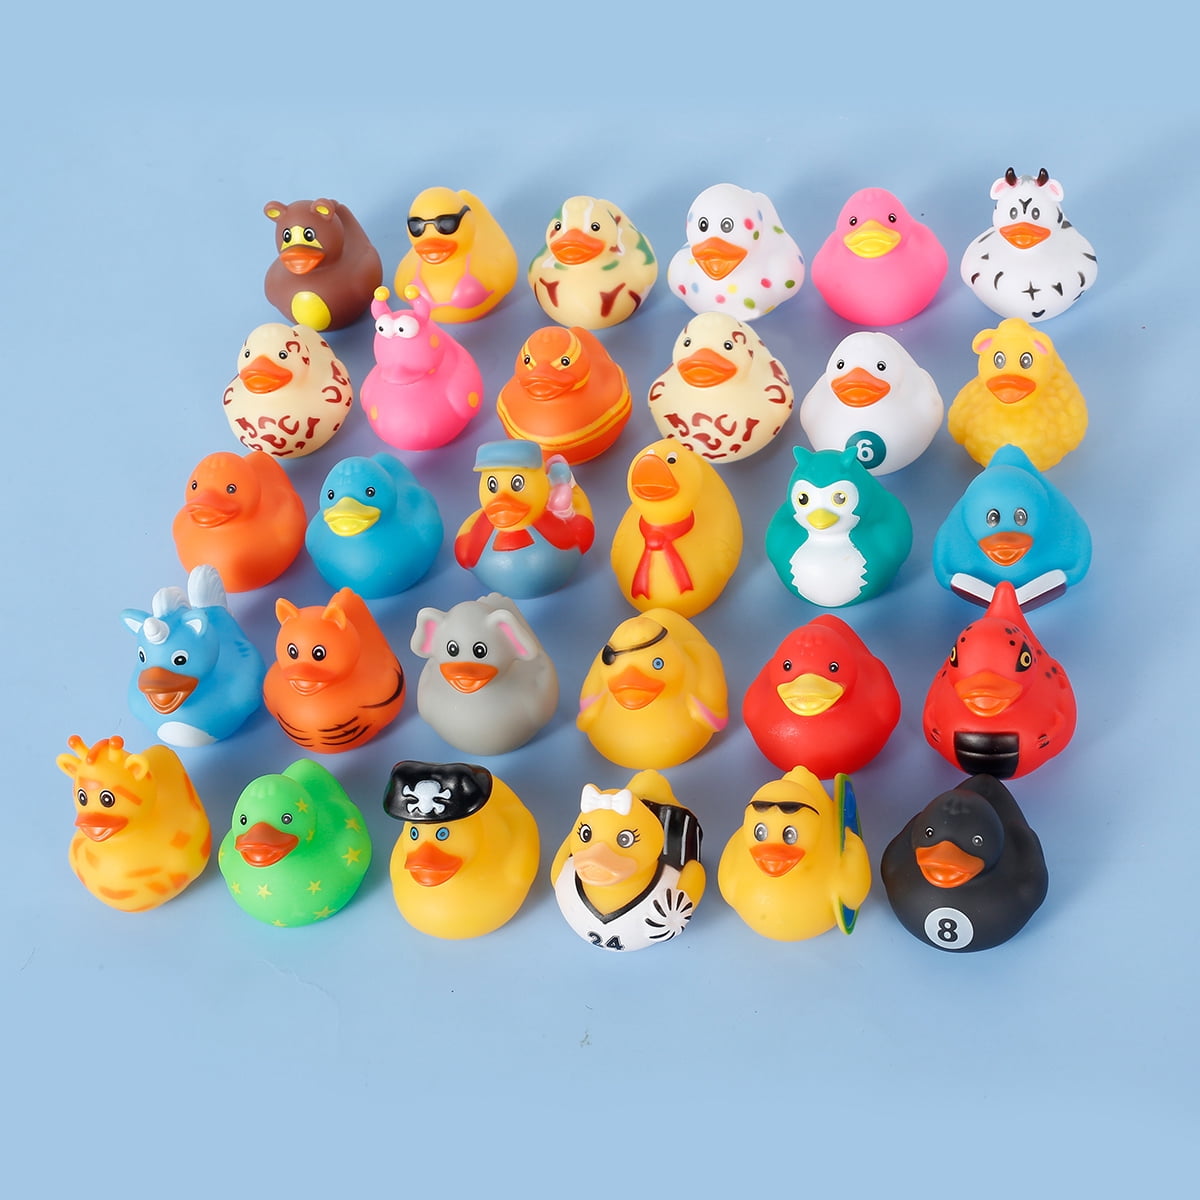 SmartYeen 30pcs Rubber Ducks Bath Toys for Toddlers 1-3,Assorted Duckies Bathtime Soft Baby Pool Toys Birthday Gifts